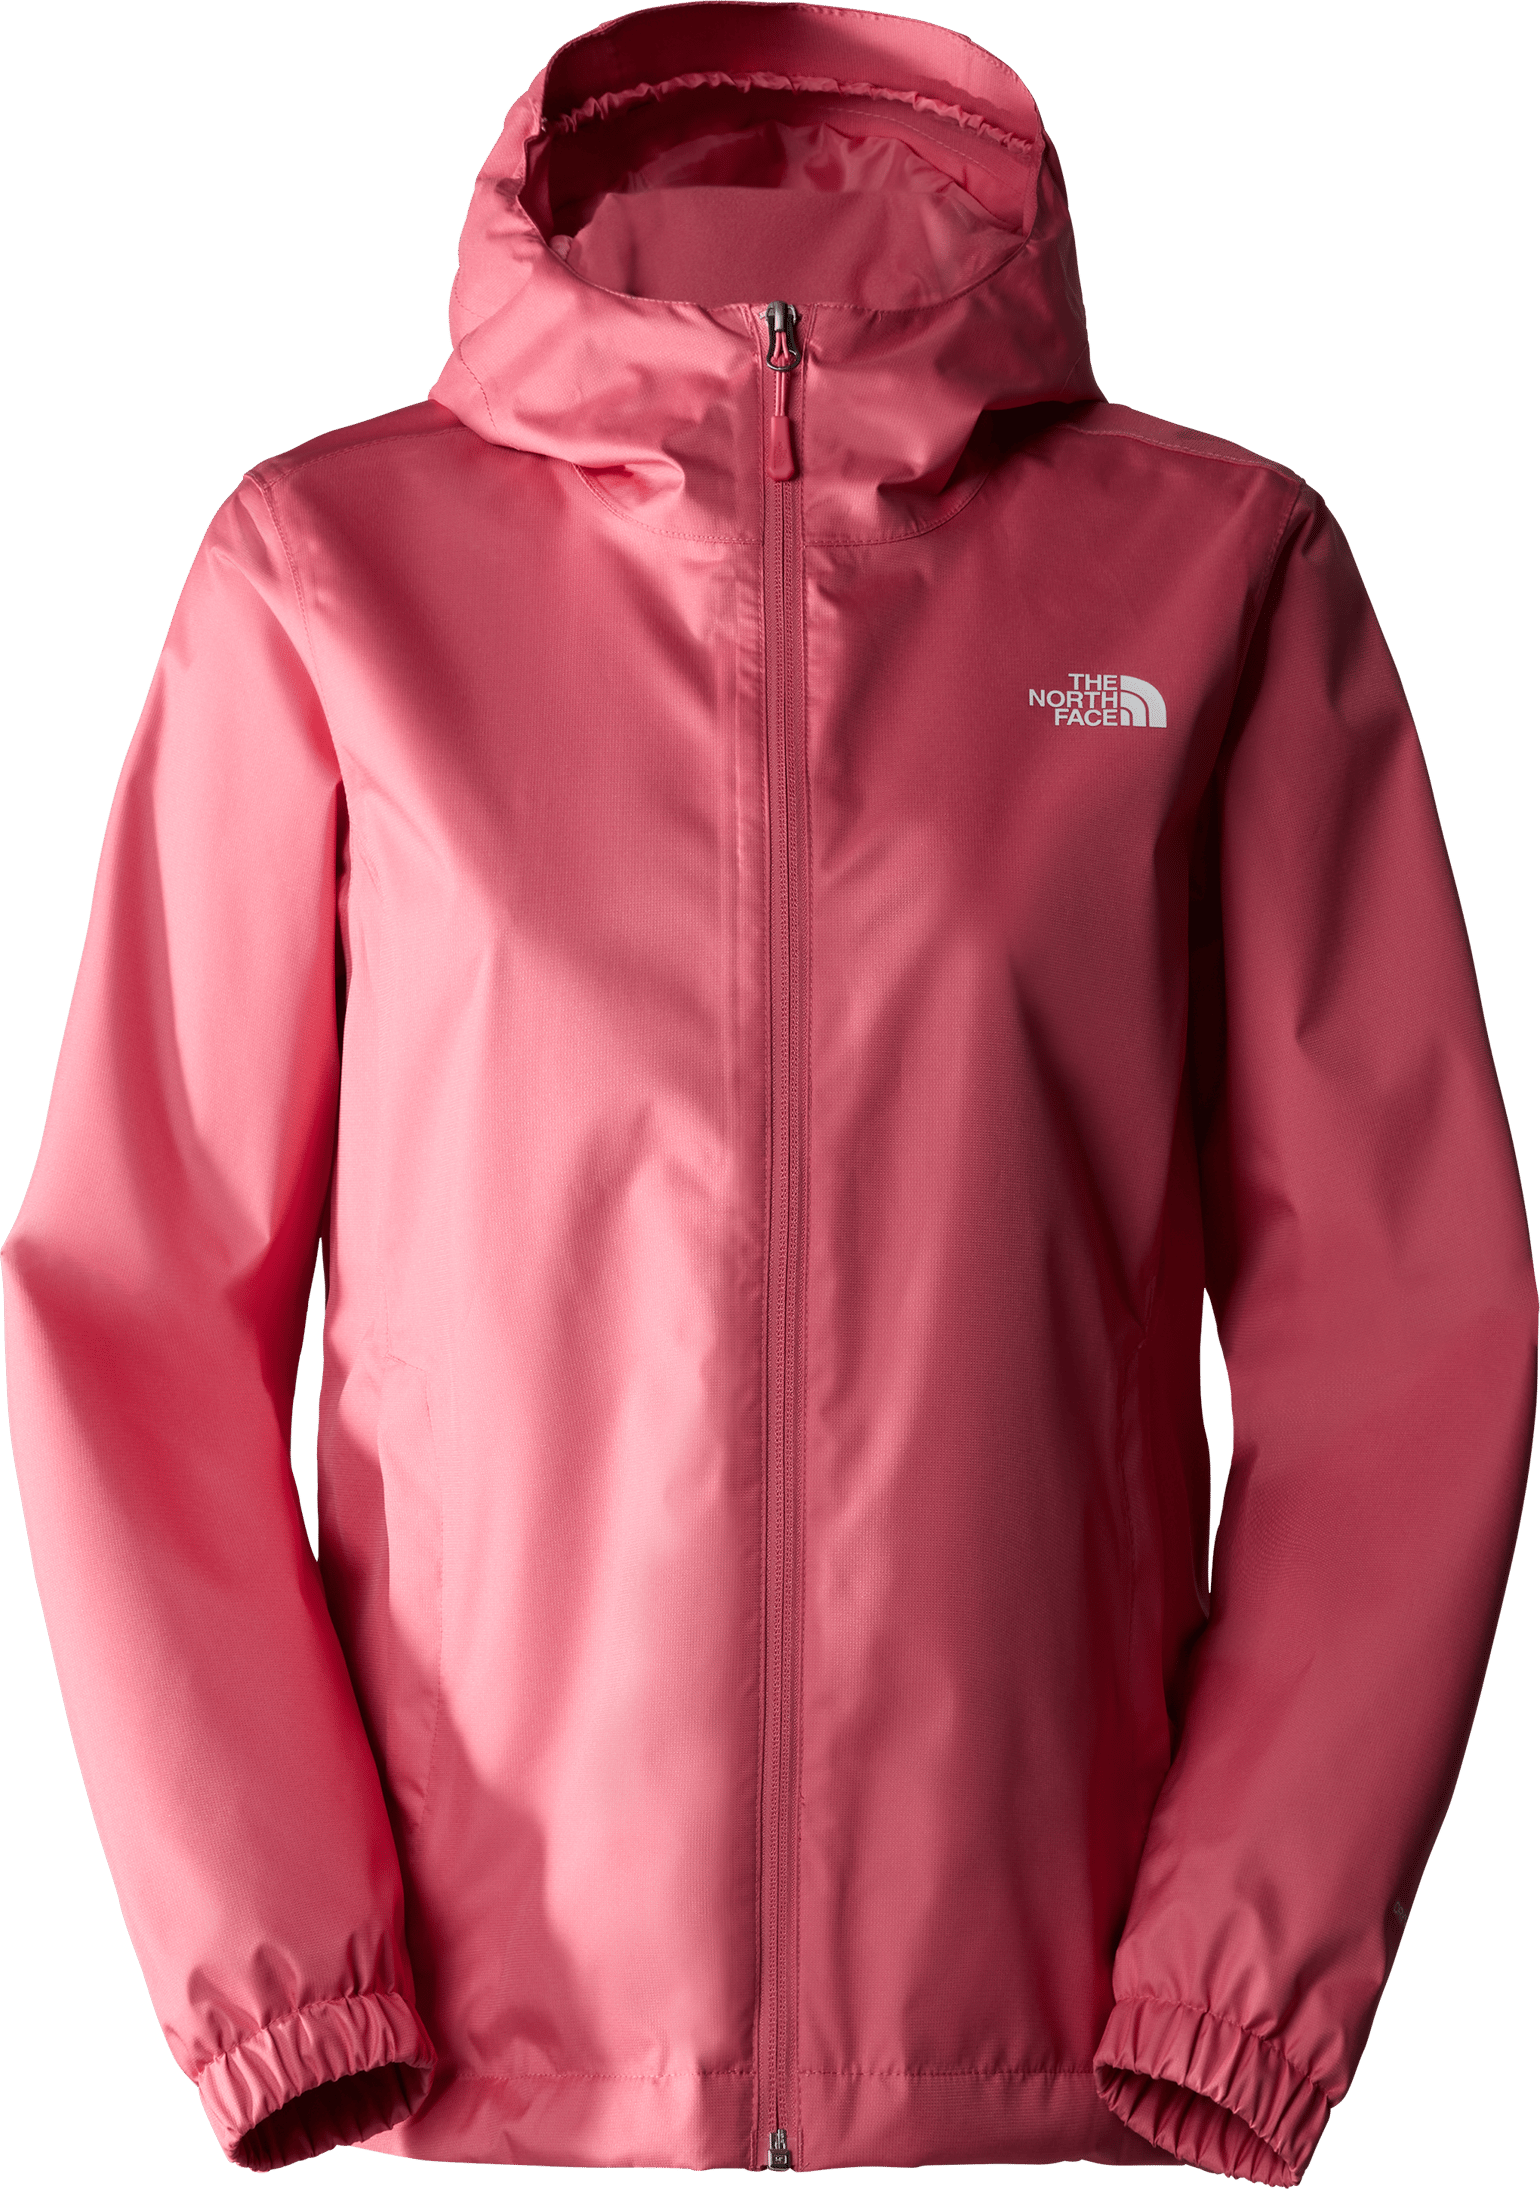 The North Face Women's Quest Jacket Cosmo Pink